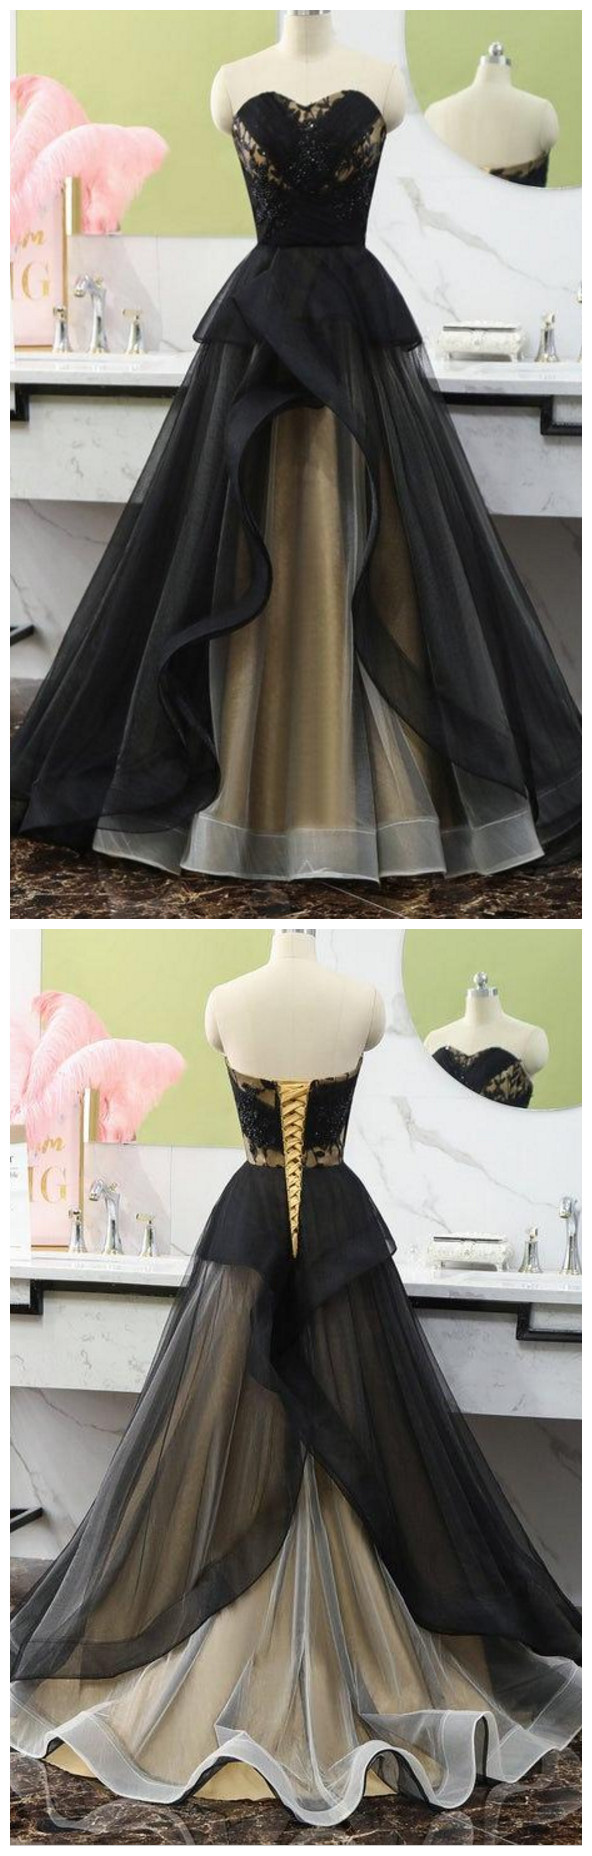 Prom Dresses Long Black Evening Dresses Wedding Party Guest Dress Formal Gown